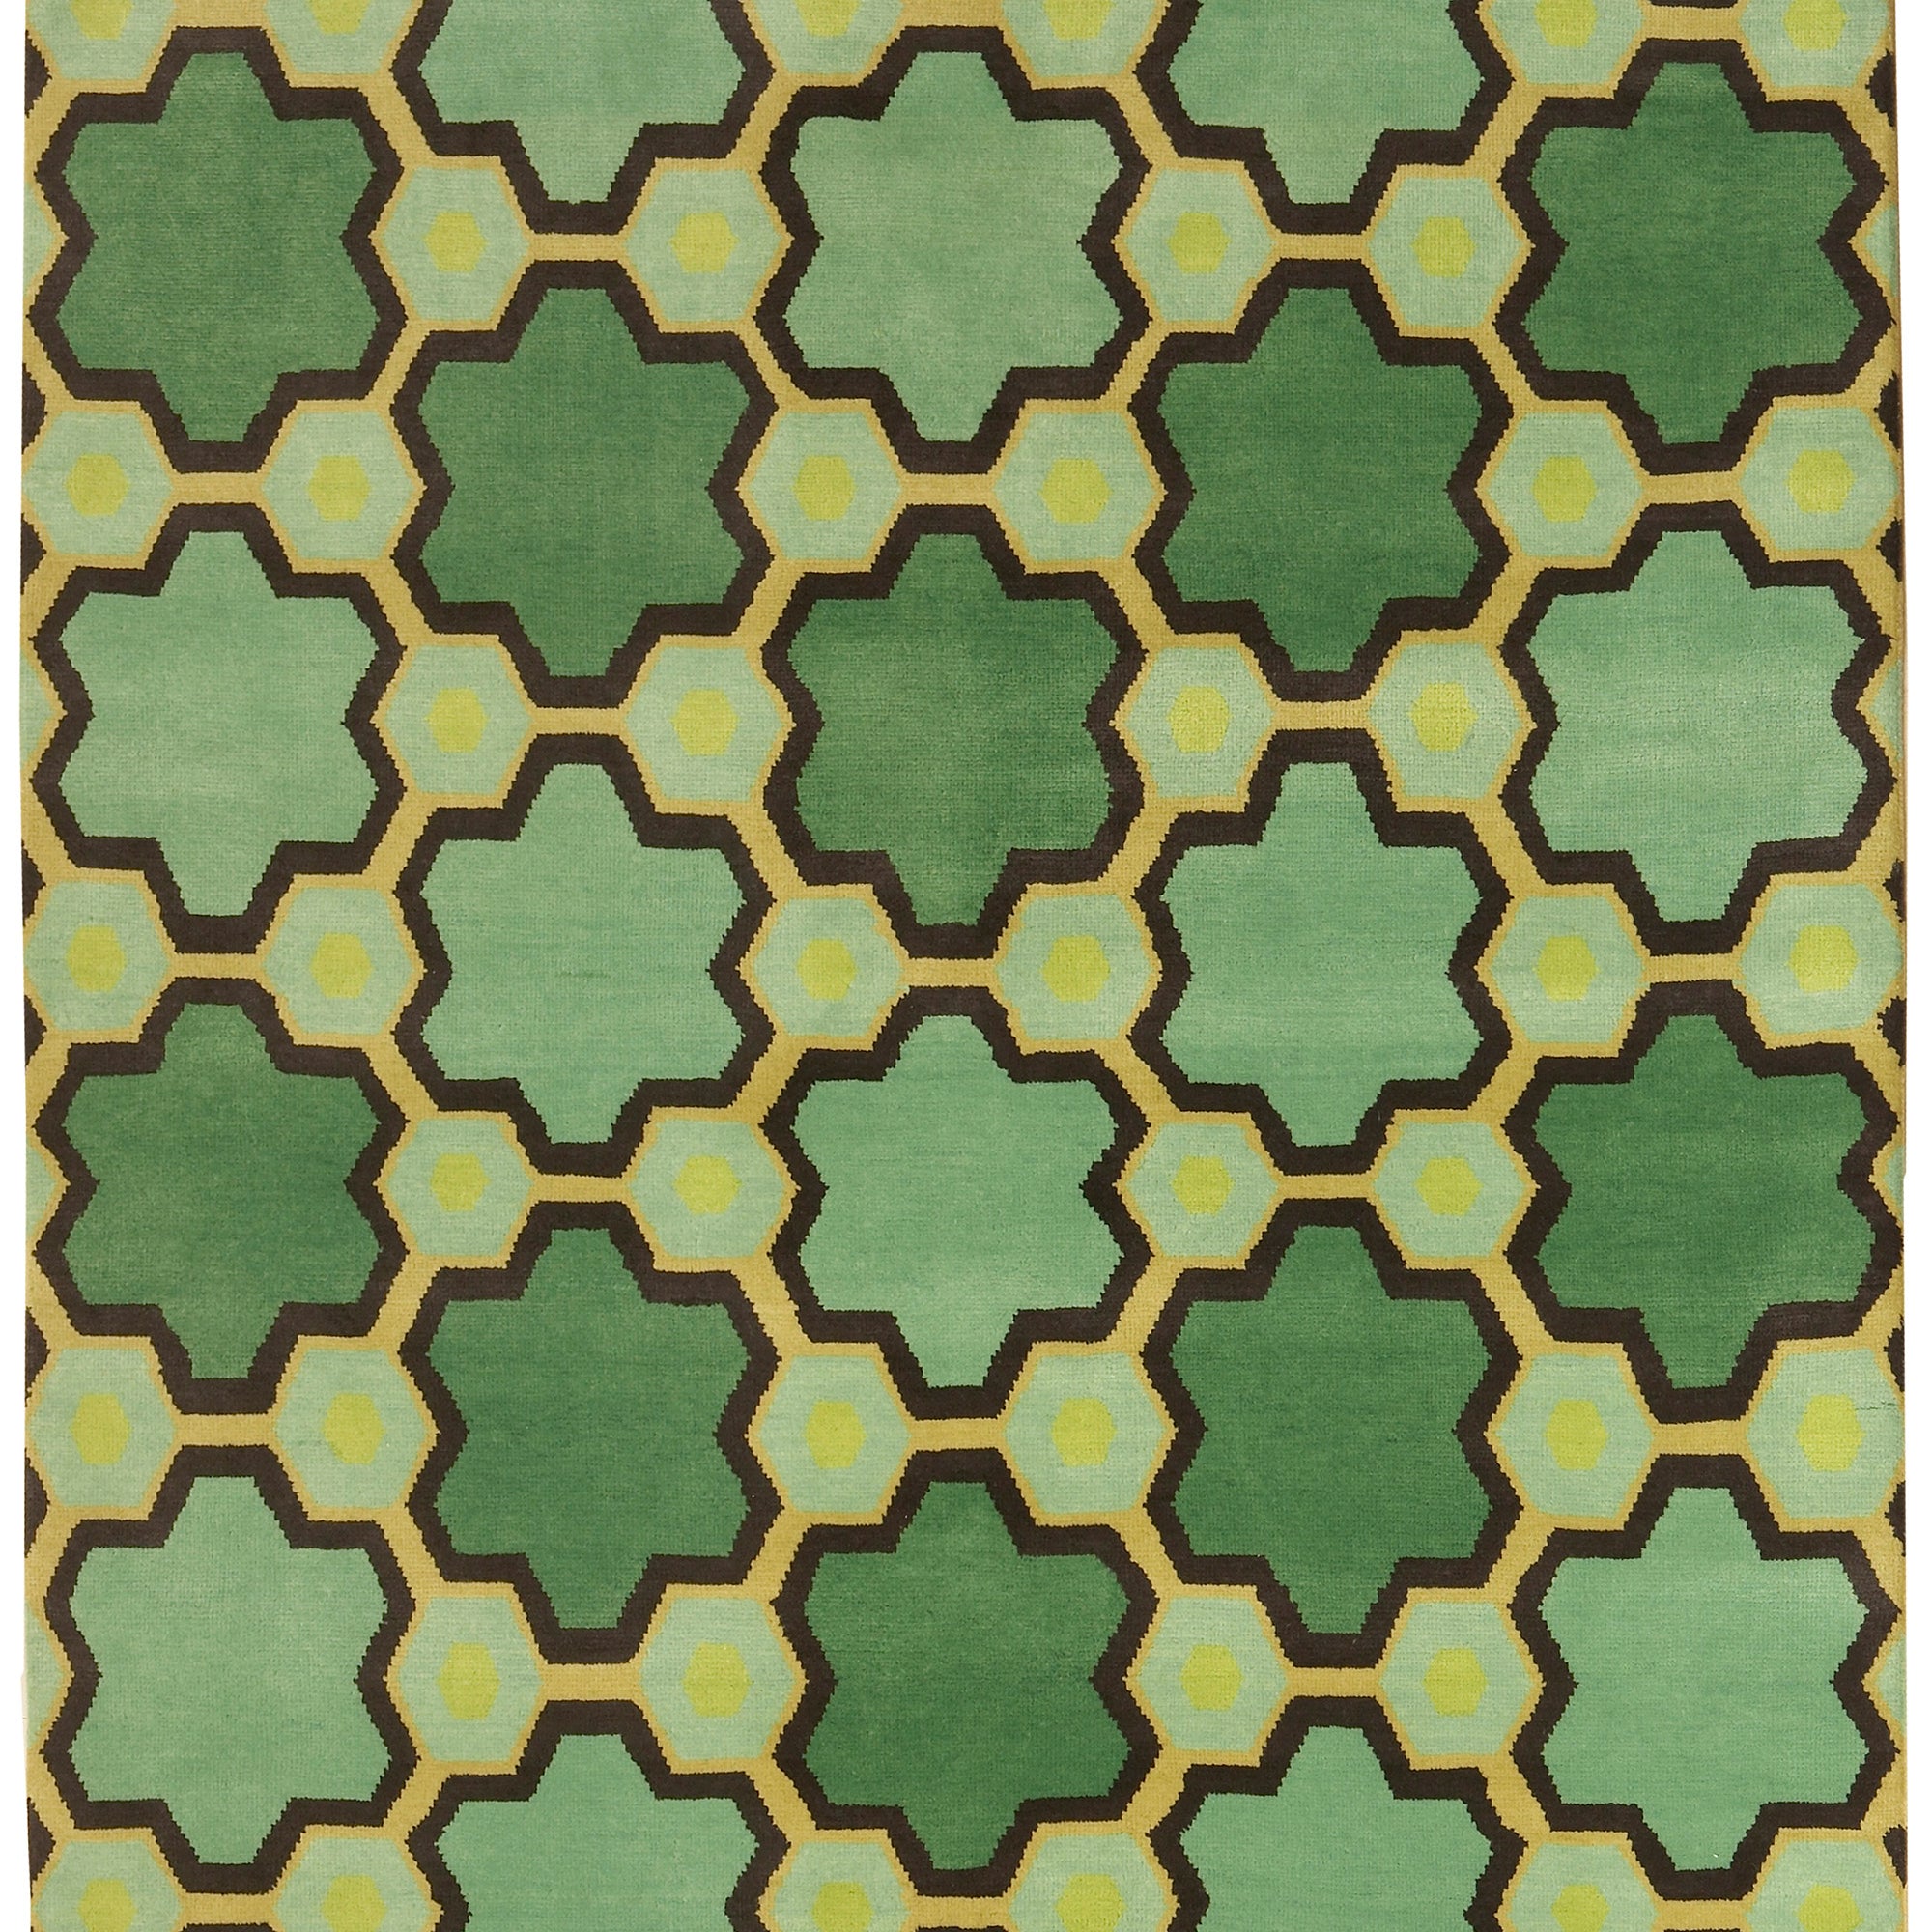 Full size of the Cordoba Cut Pile Rug in Emerald, a hexagonal lattice pattern with sahdes of emerald, jade, yelow and chcolate brown. 